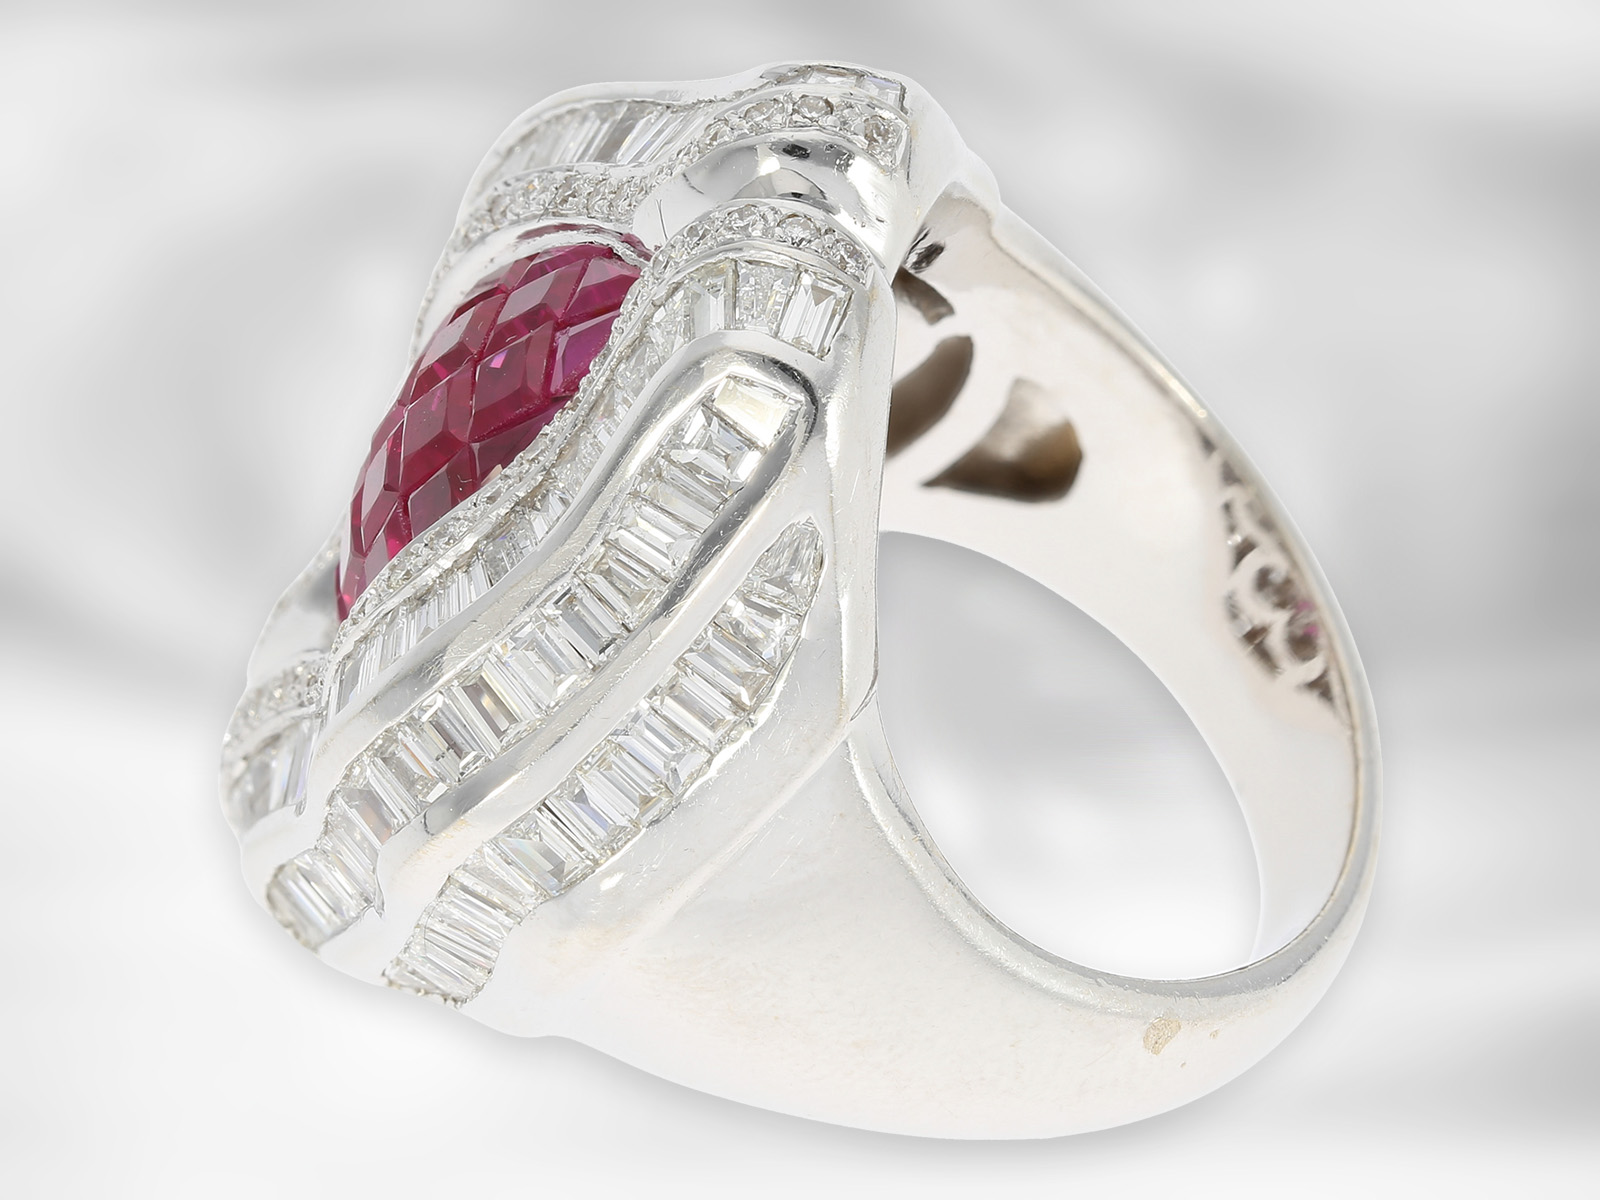 Ring: extravagant luxurious diamond/ruby ring, total approx. 5.49ct, 18K white gold, sophisticated g - Image 5 of 8